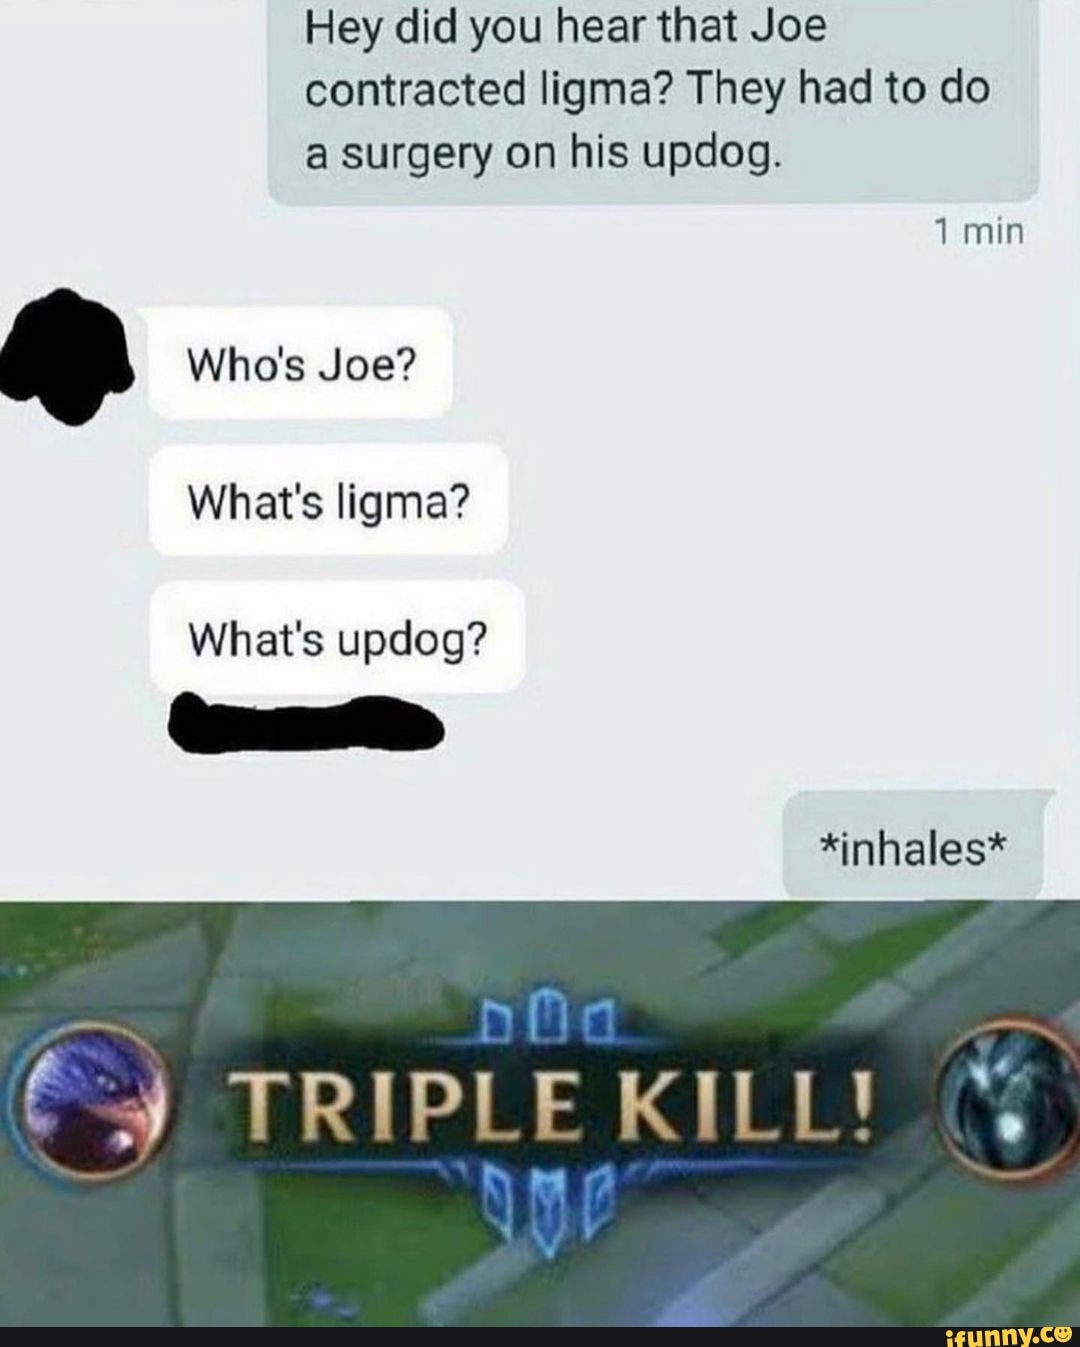 Hey did you hear that Joe contracted ligme? They had to do surgery